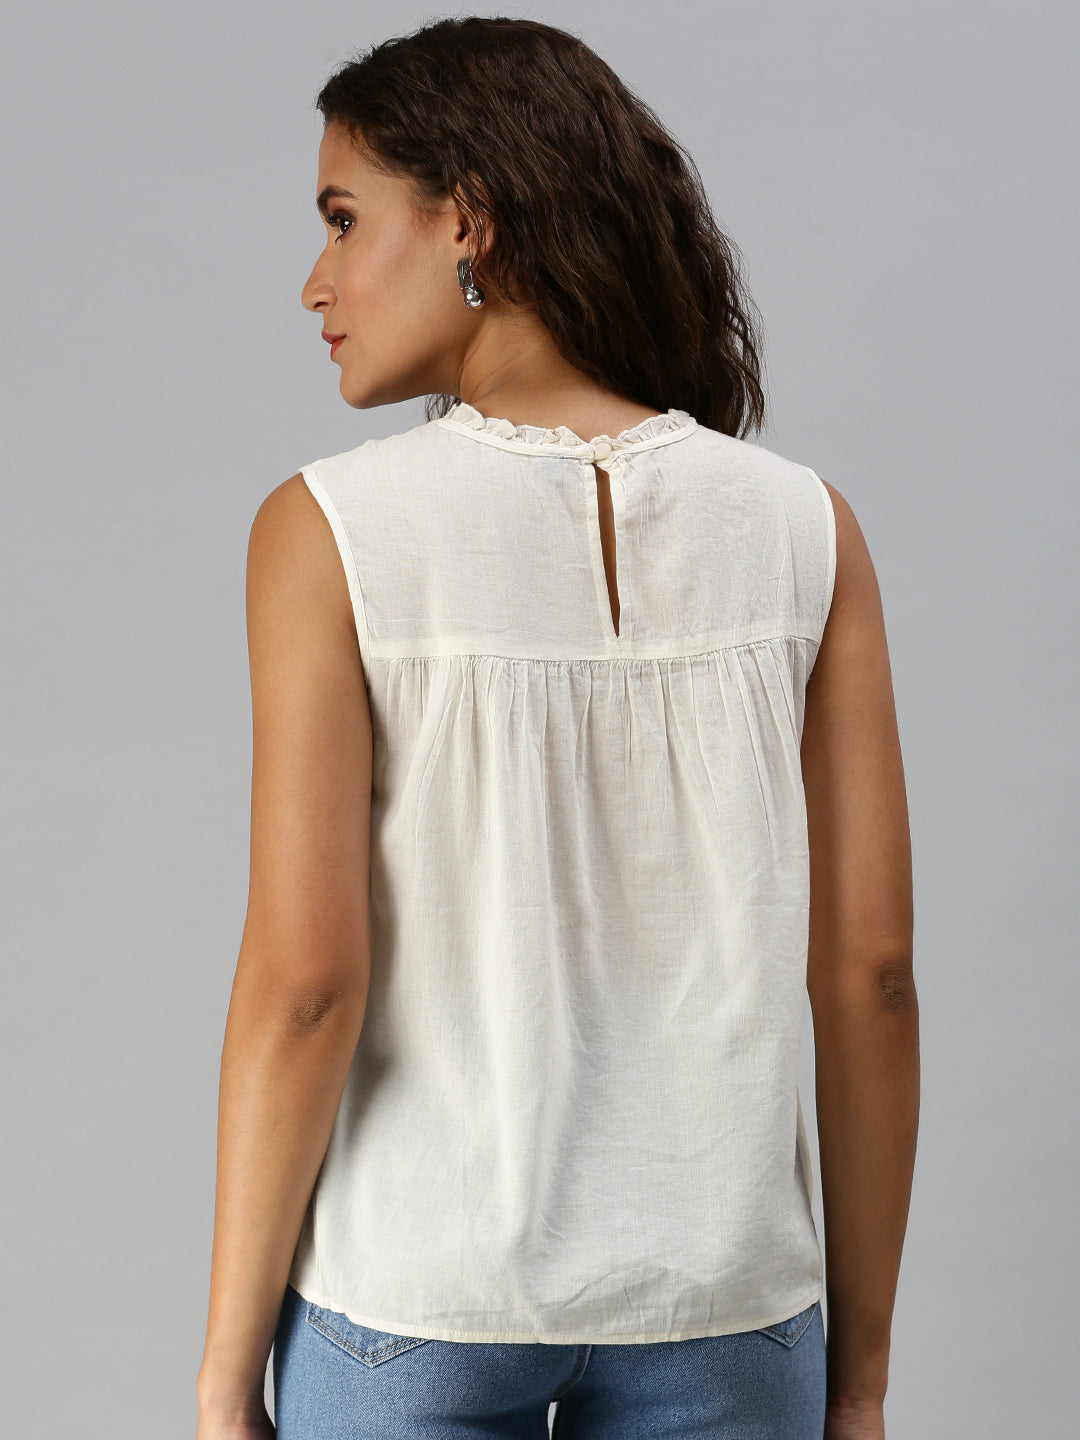 Women's White Solid Tops